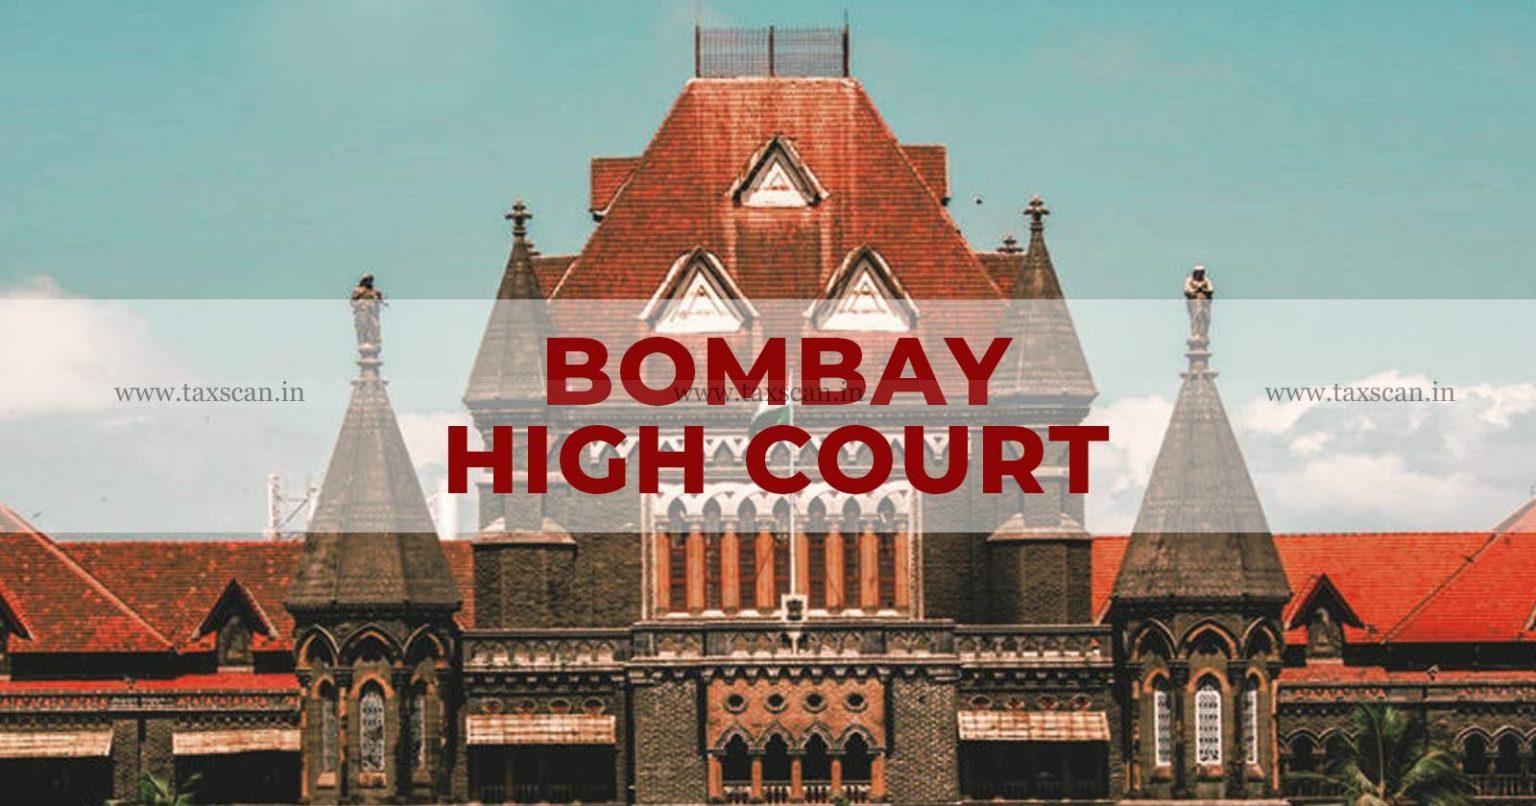 Anti Dumping Duty - Lapsed Excise Notification - Bombay High Court - Appeal - CESTAT - taxscan